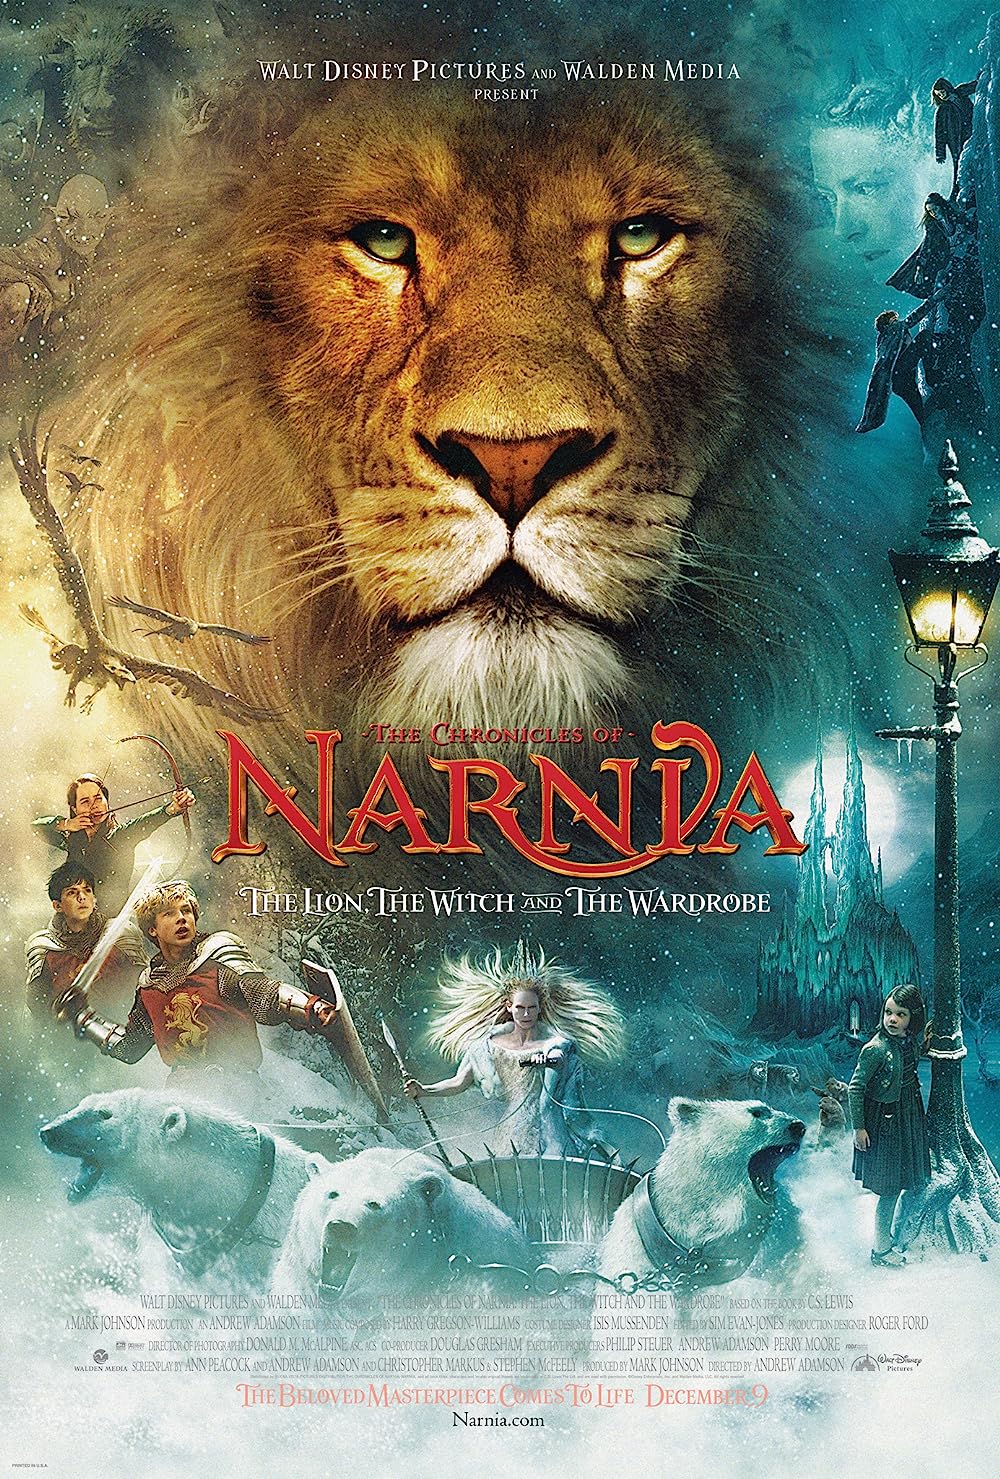 The Chronicles of Narnia The Lion the Witch and the Wardrobe (2005) 720p BluRay Hindi ORG Dual Audio Movie MSubs [1GB] – 9xmovies